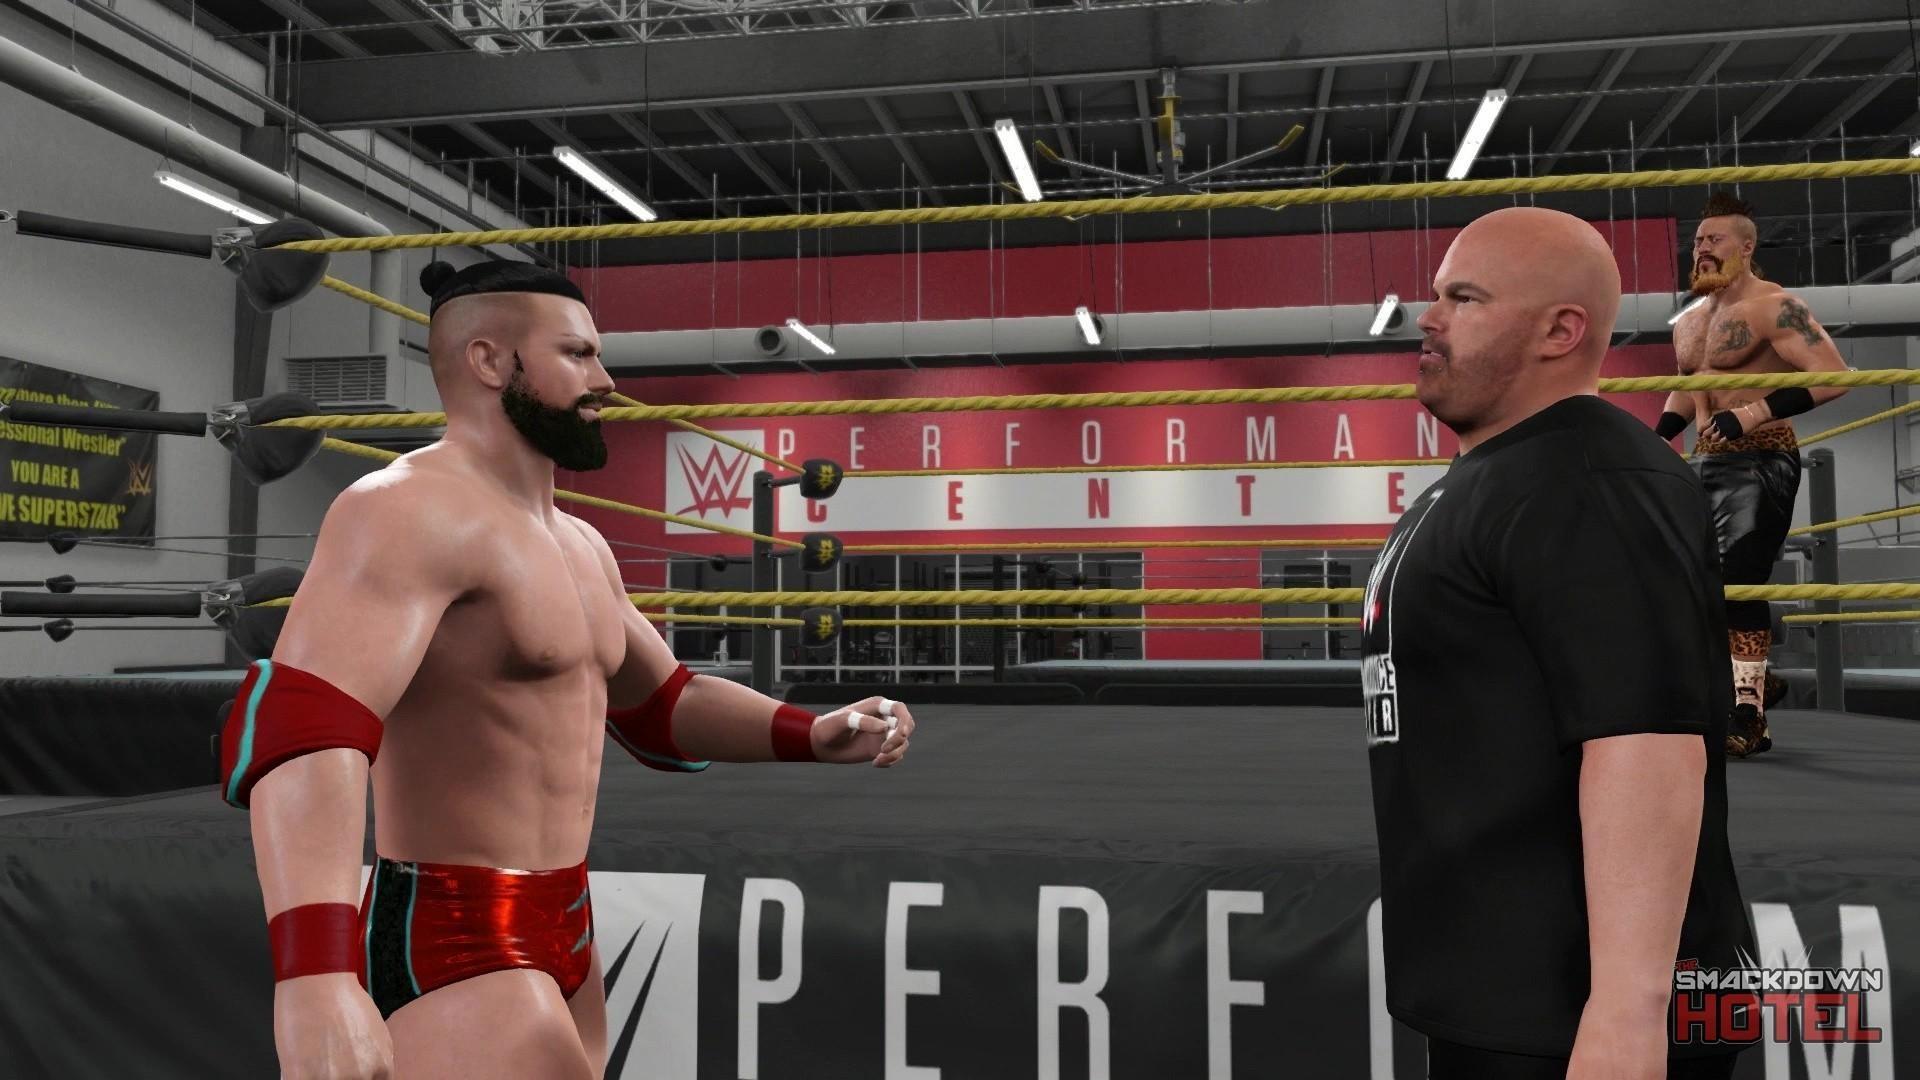 All Details On Wwe 2k16 Mycareer Mode Run In Interviews Rivalries Rankings Hall Of Fame More With Screenshots Wwe 2k16 News